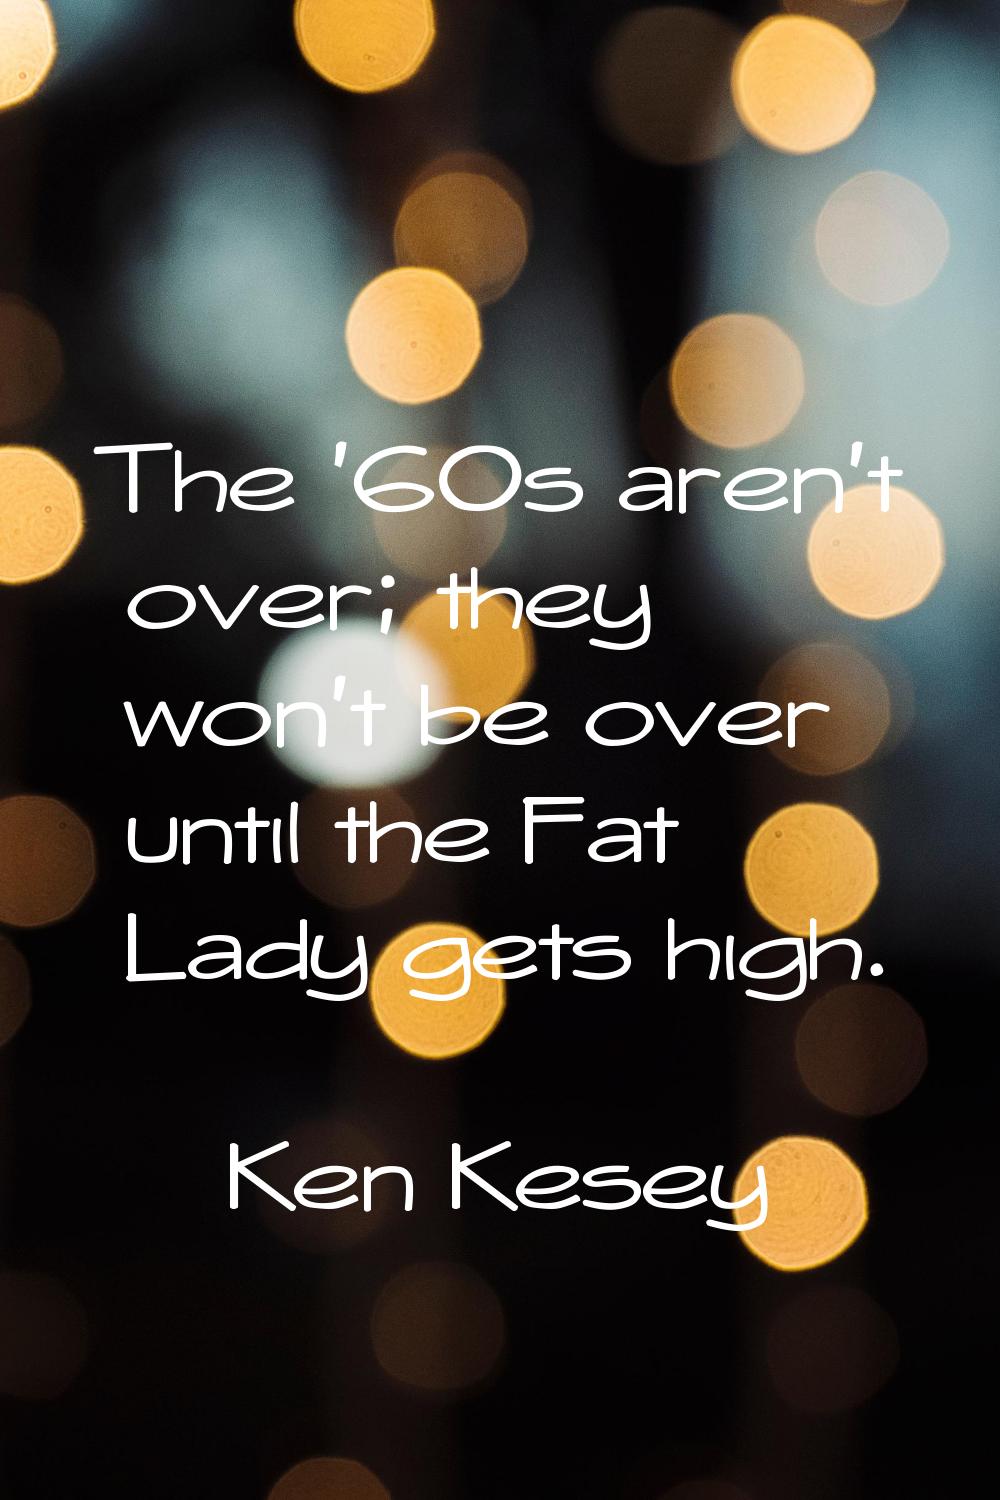 The '60s aren't over; they won't be over until the Fat Lady gets high.